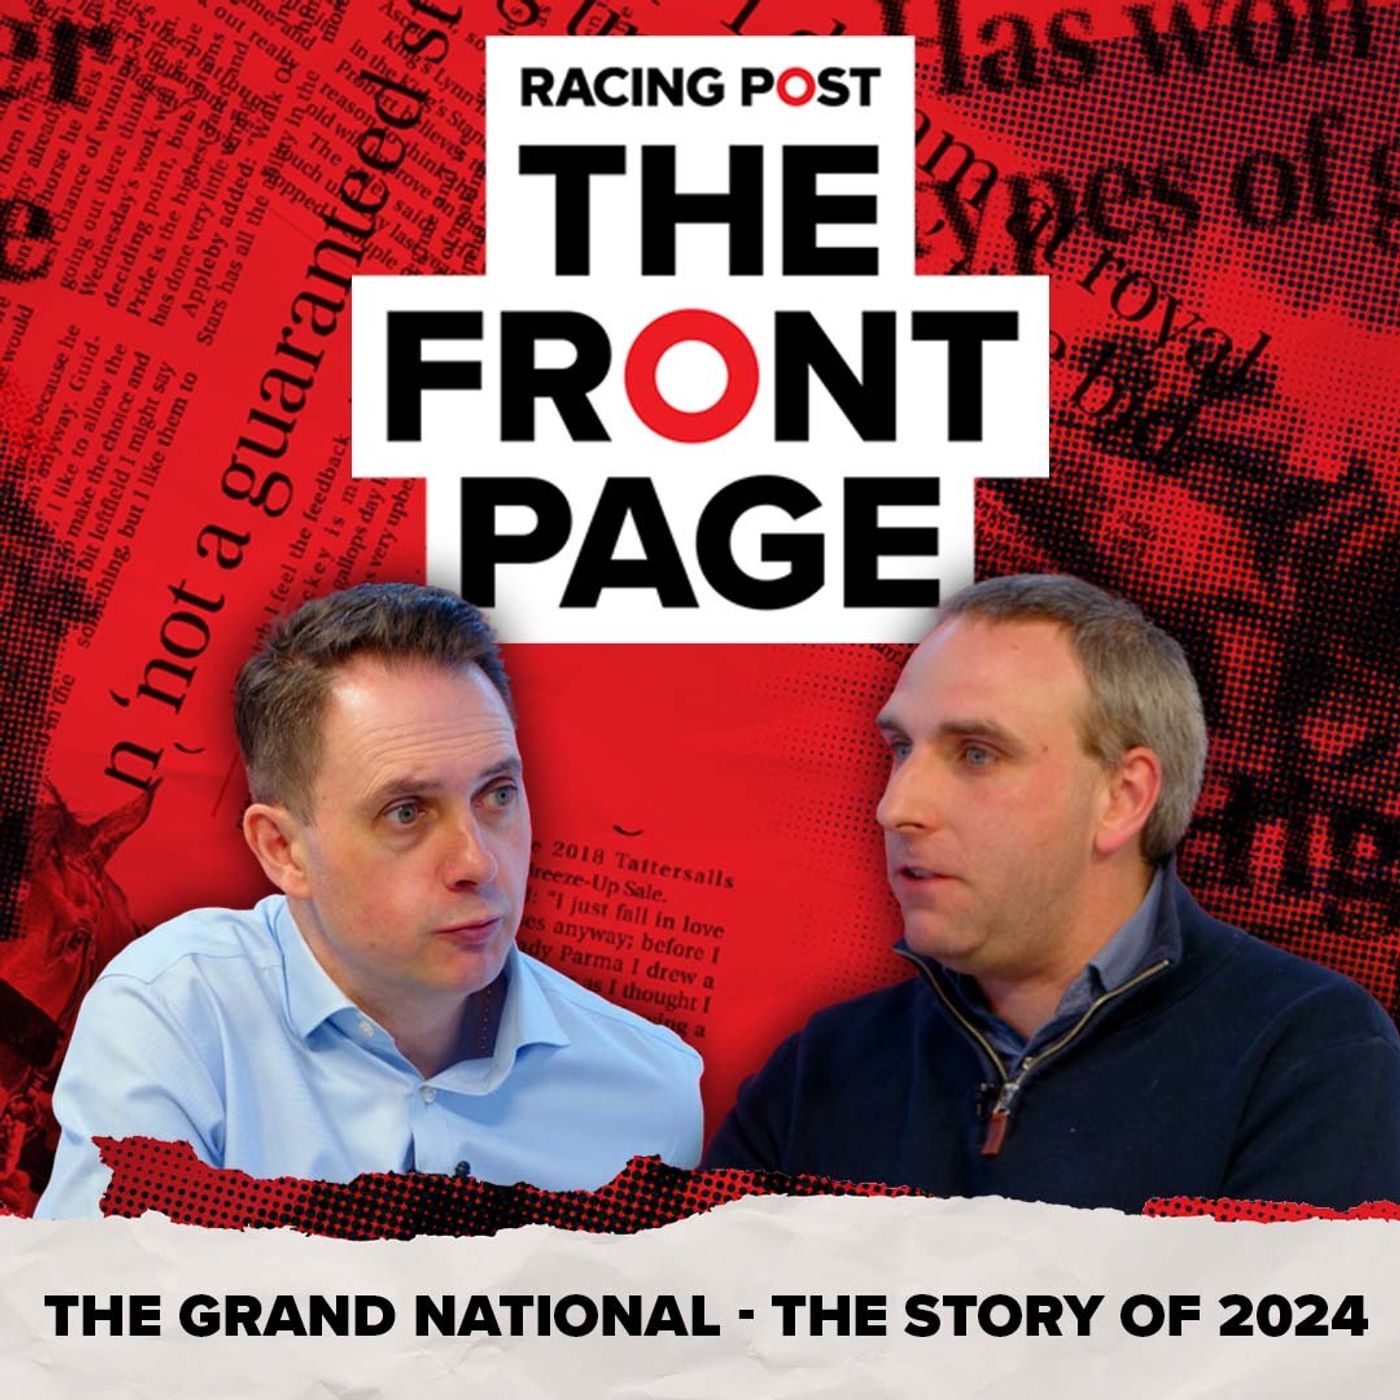 160: The Grand National - The story of 2024 | The Front Page | Horse Racing News